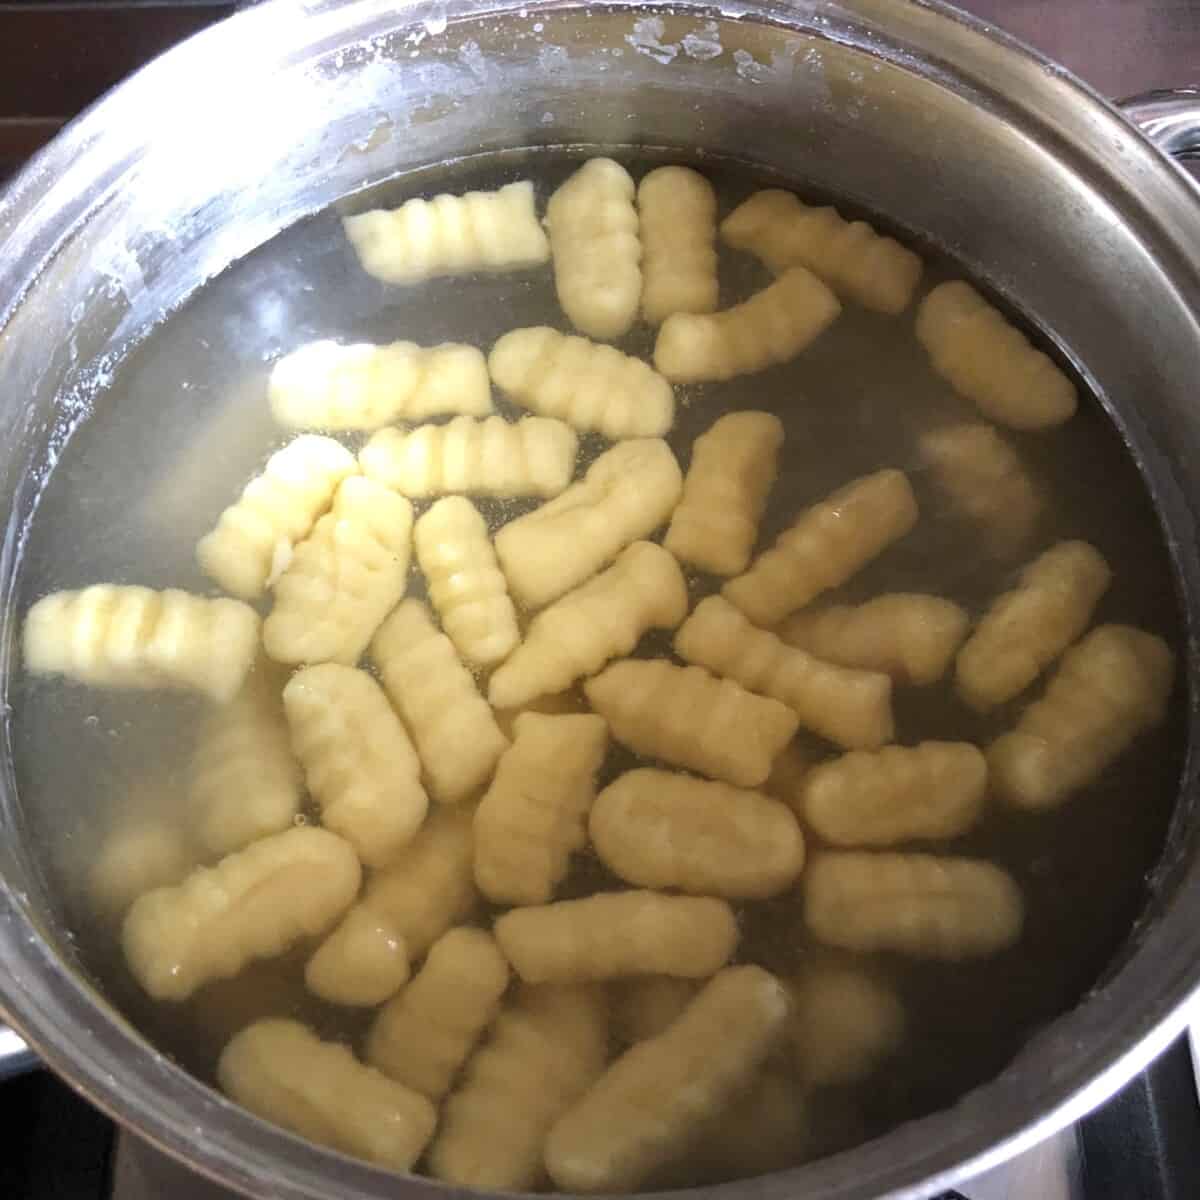 fully cooked gnocchi that's risen to the top of the boiling salted water indicating it's ready to be eaten.